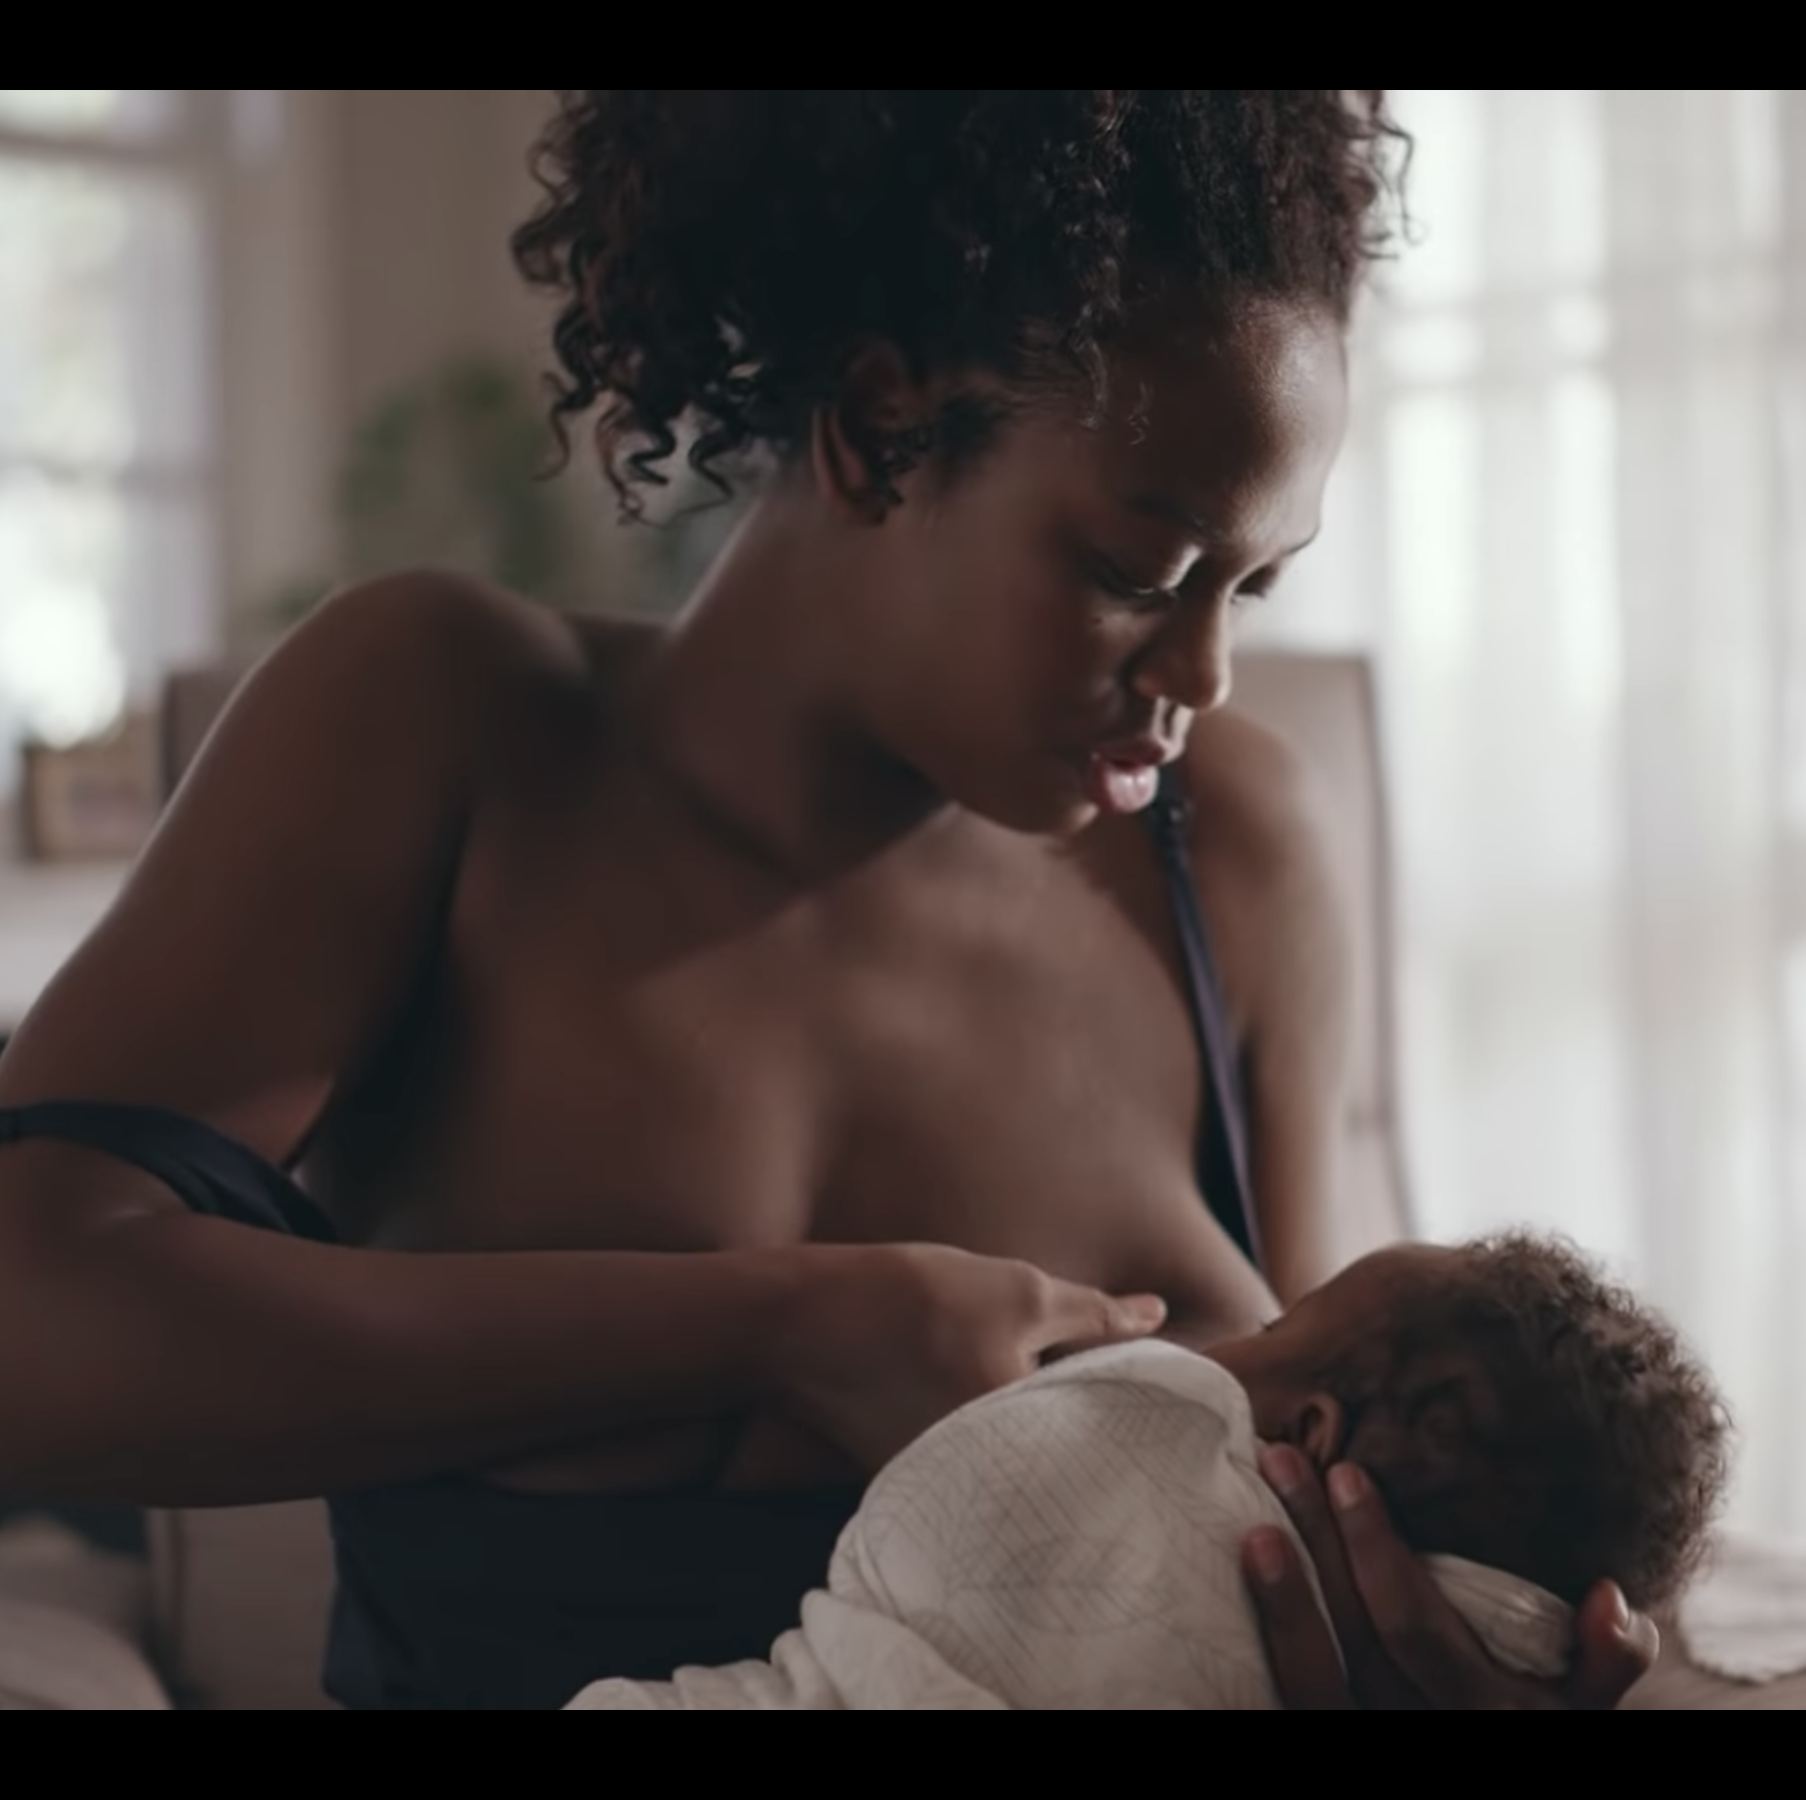 A Powerful Breastfeeding Ad Aired During the Golden Globes